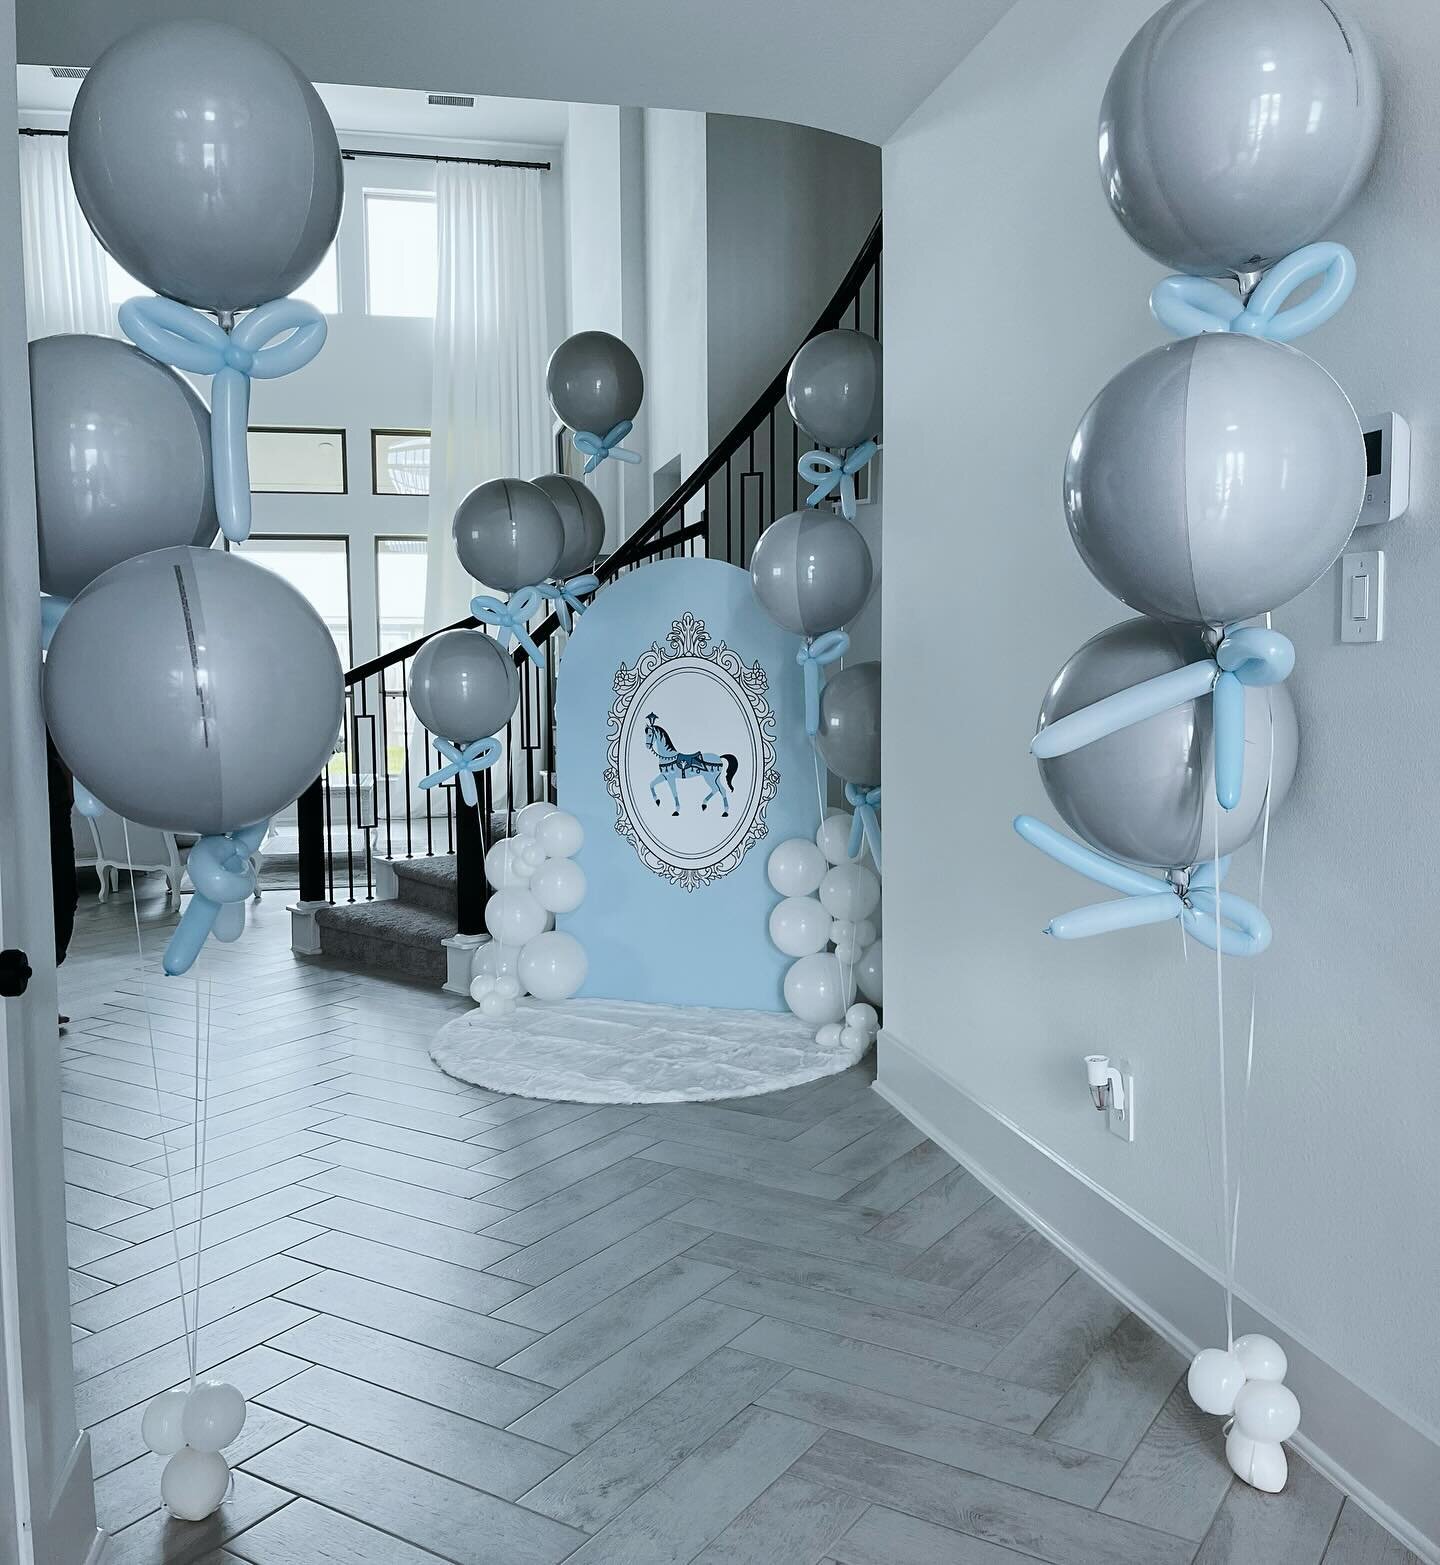 🤍Welcome Home Baby boy 🤍

Book us for your next event; dessert tables, balloon backdrops, charcuterie, event rentals, &amp; much more 

Visit 👇🏽
velveteventspace.com 
to inquire! 

#babyboy #babyboynursery #babyroomdecoration #babywelcome #babywe